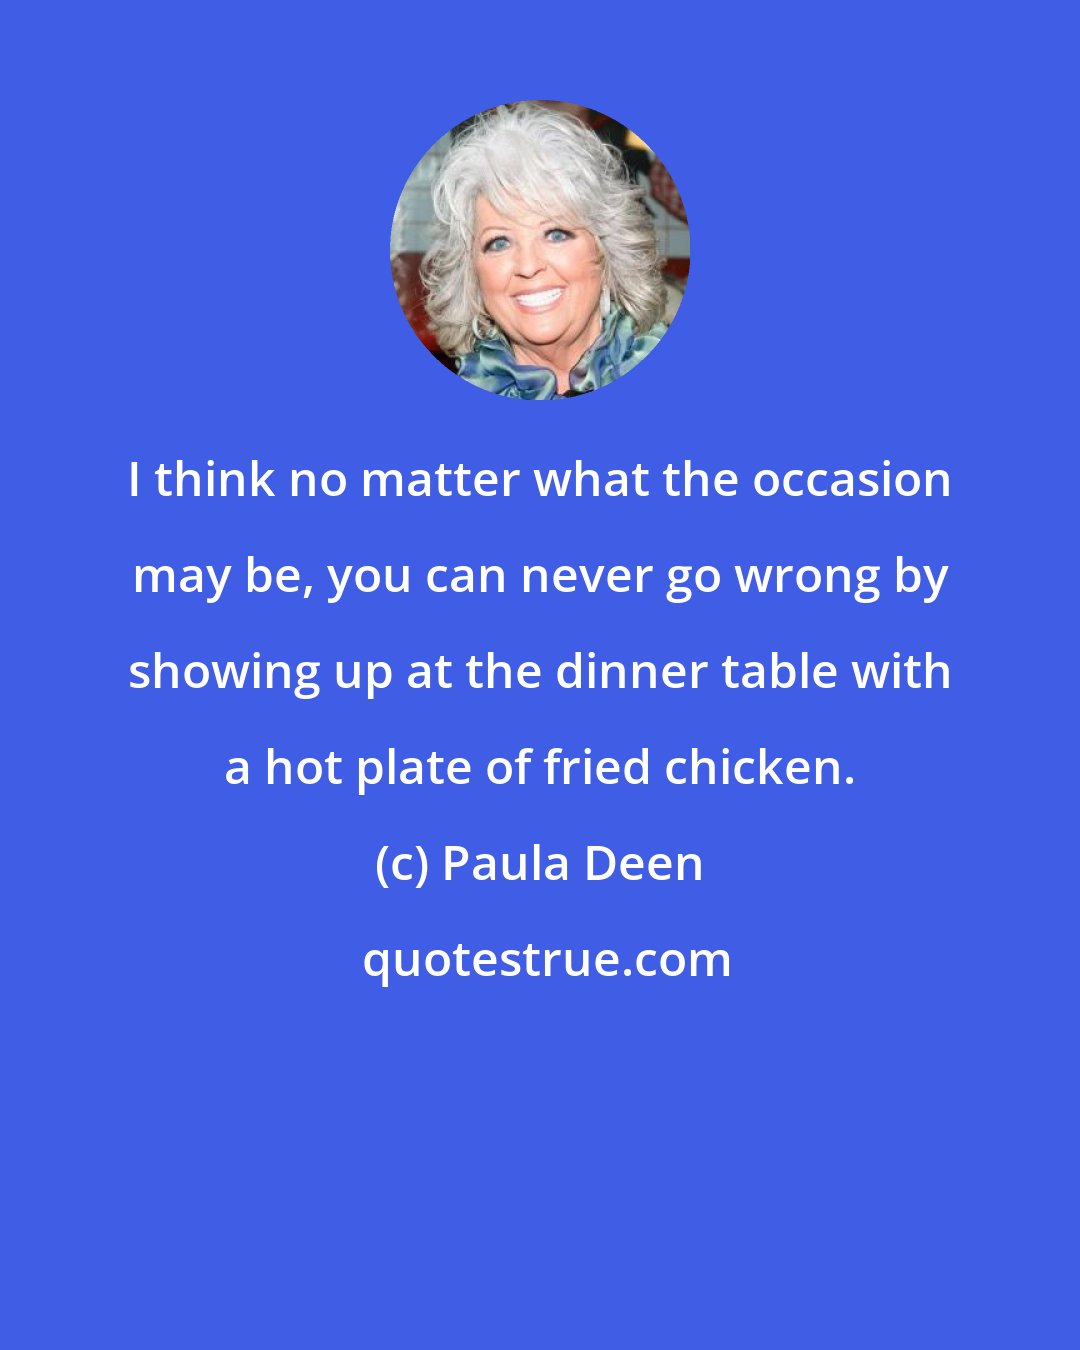 Paula Deen: I think no matter what the occasion may be, you can never go wrong by showing up at the dinner table with a hot plate of fried chicken.